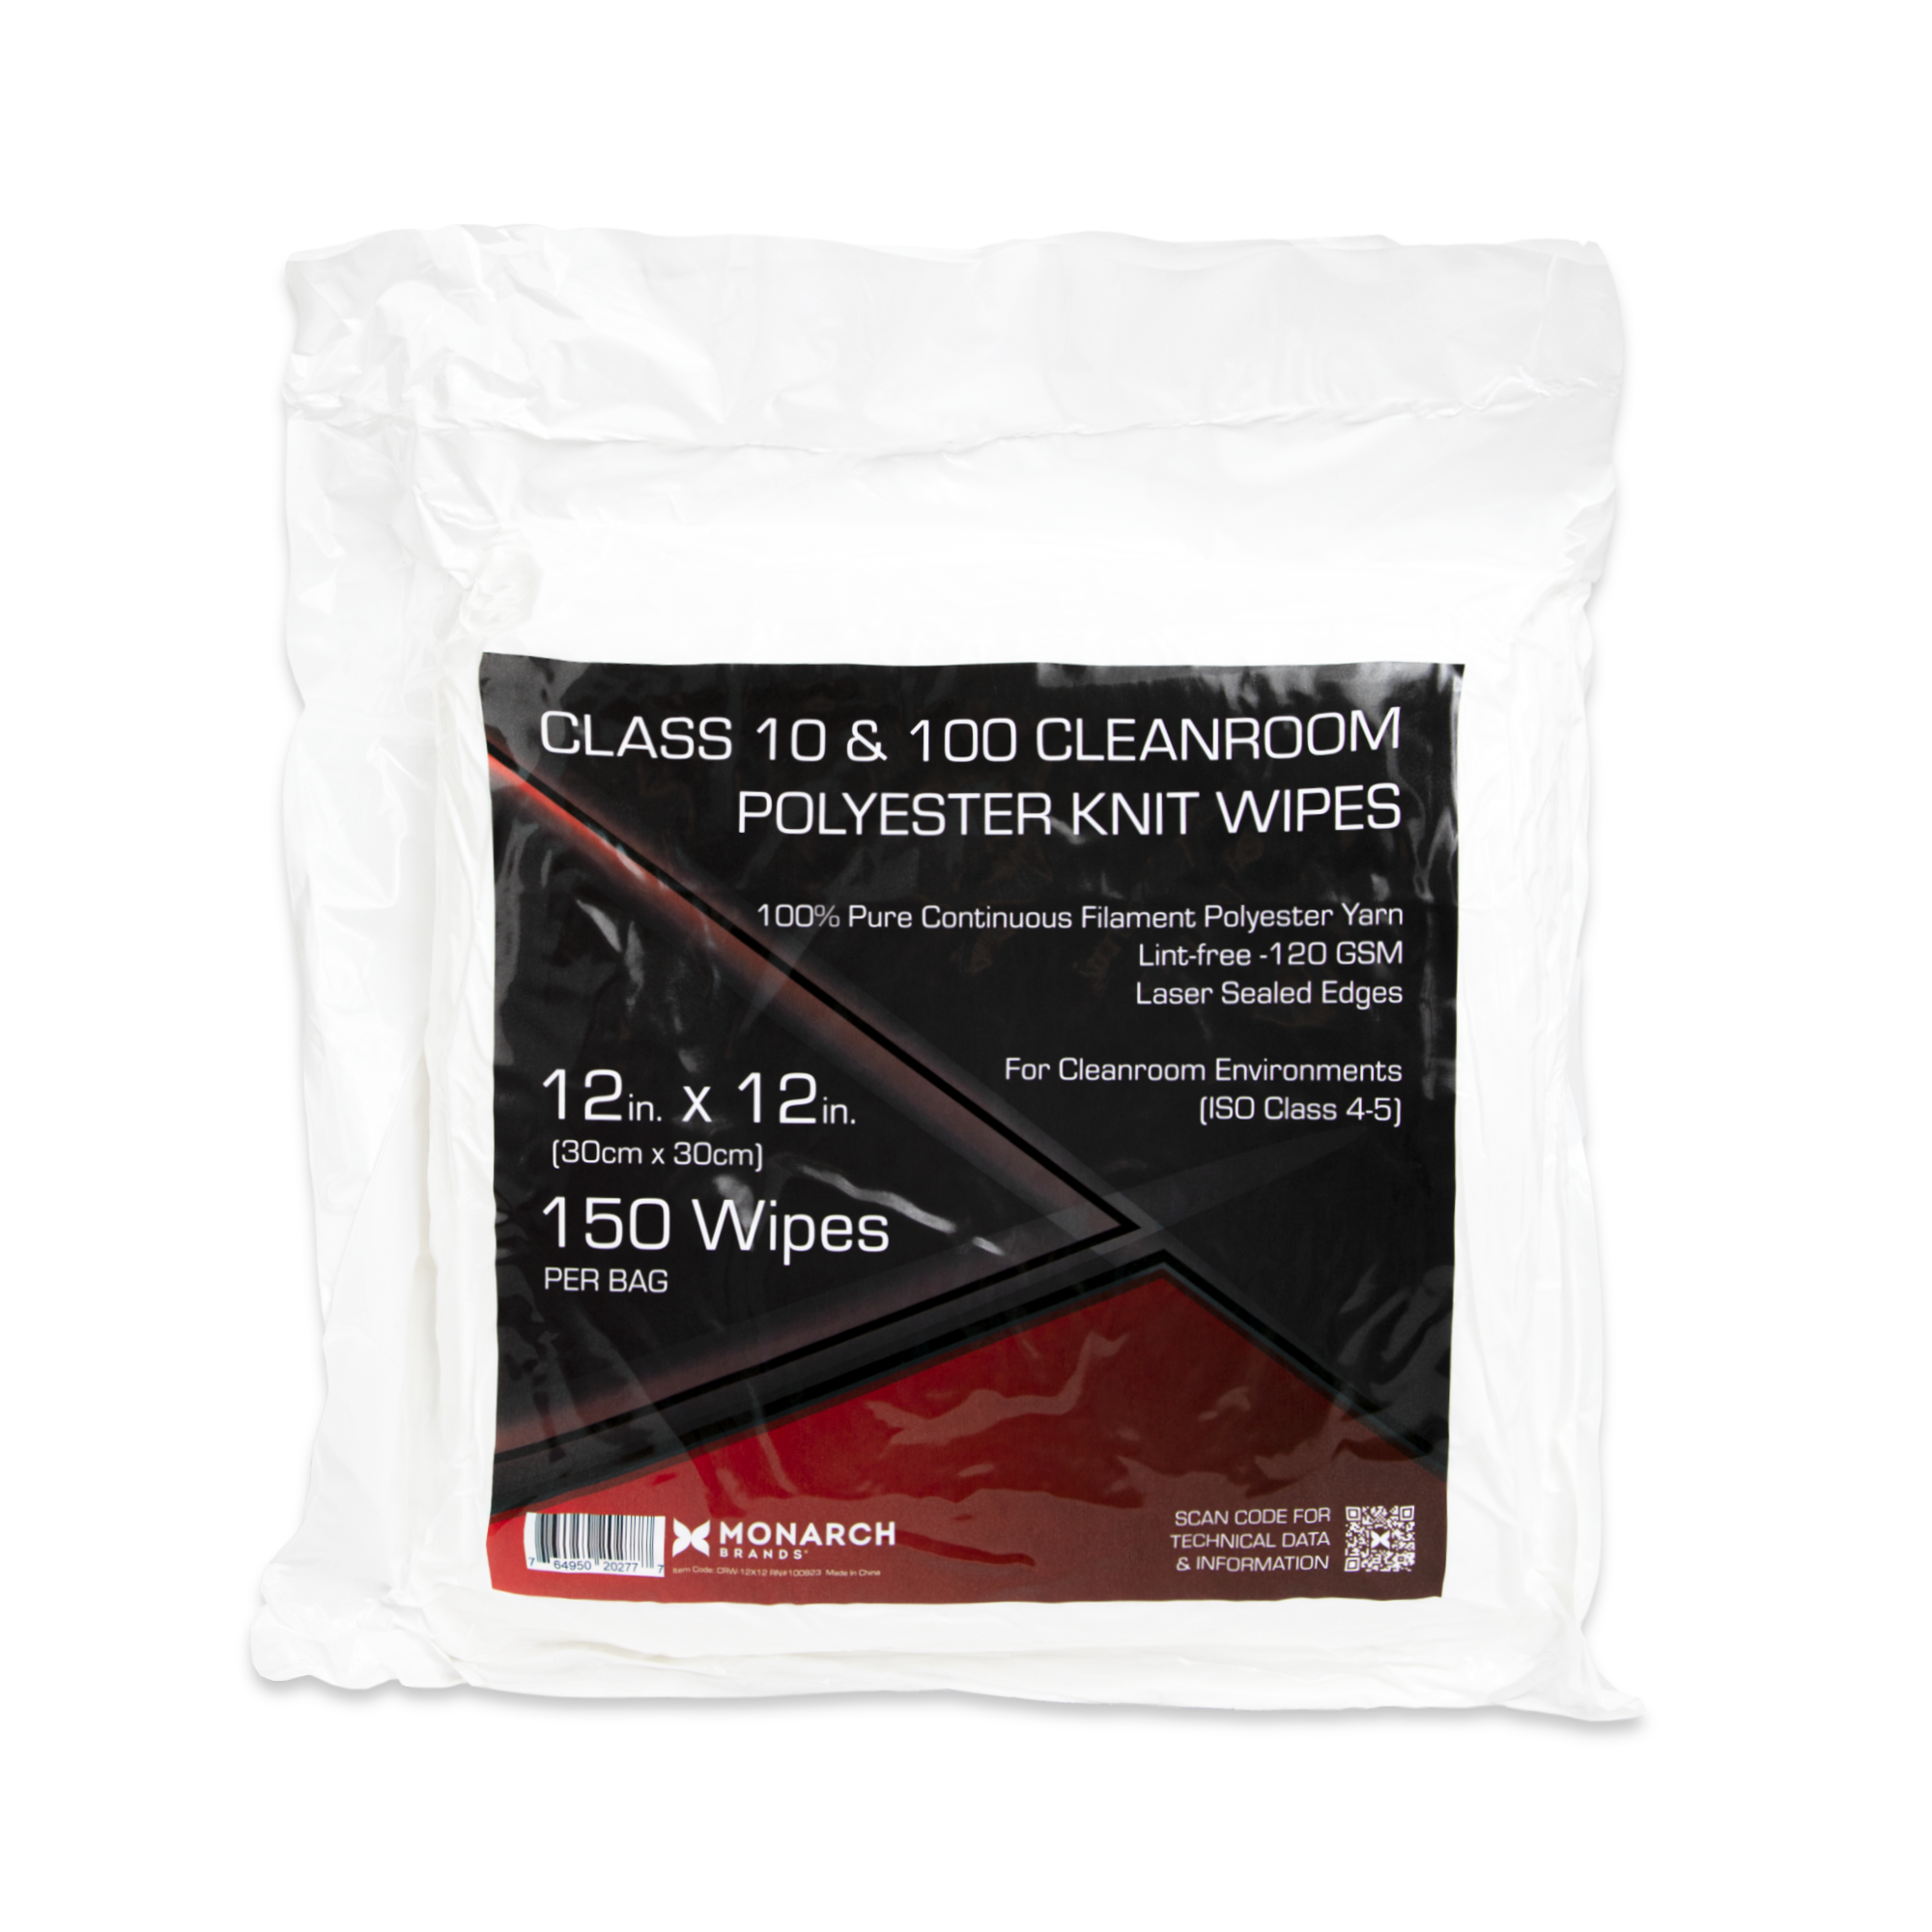 Pack of 300 9 x 9" Wipers Microcare Lint Free Cleanroom Wipes 